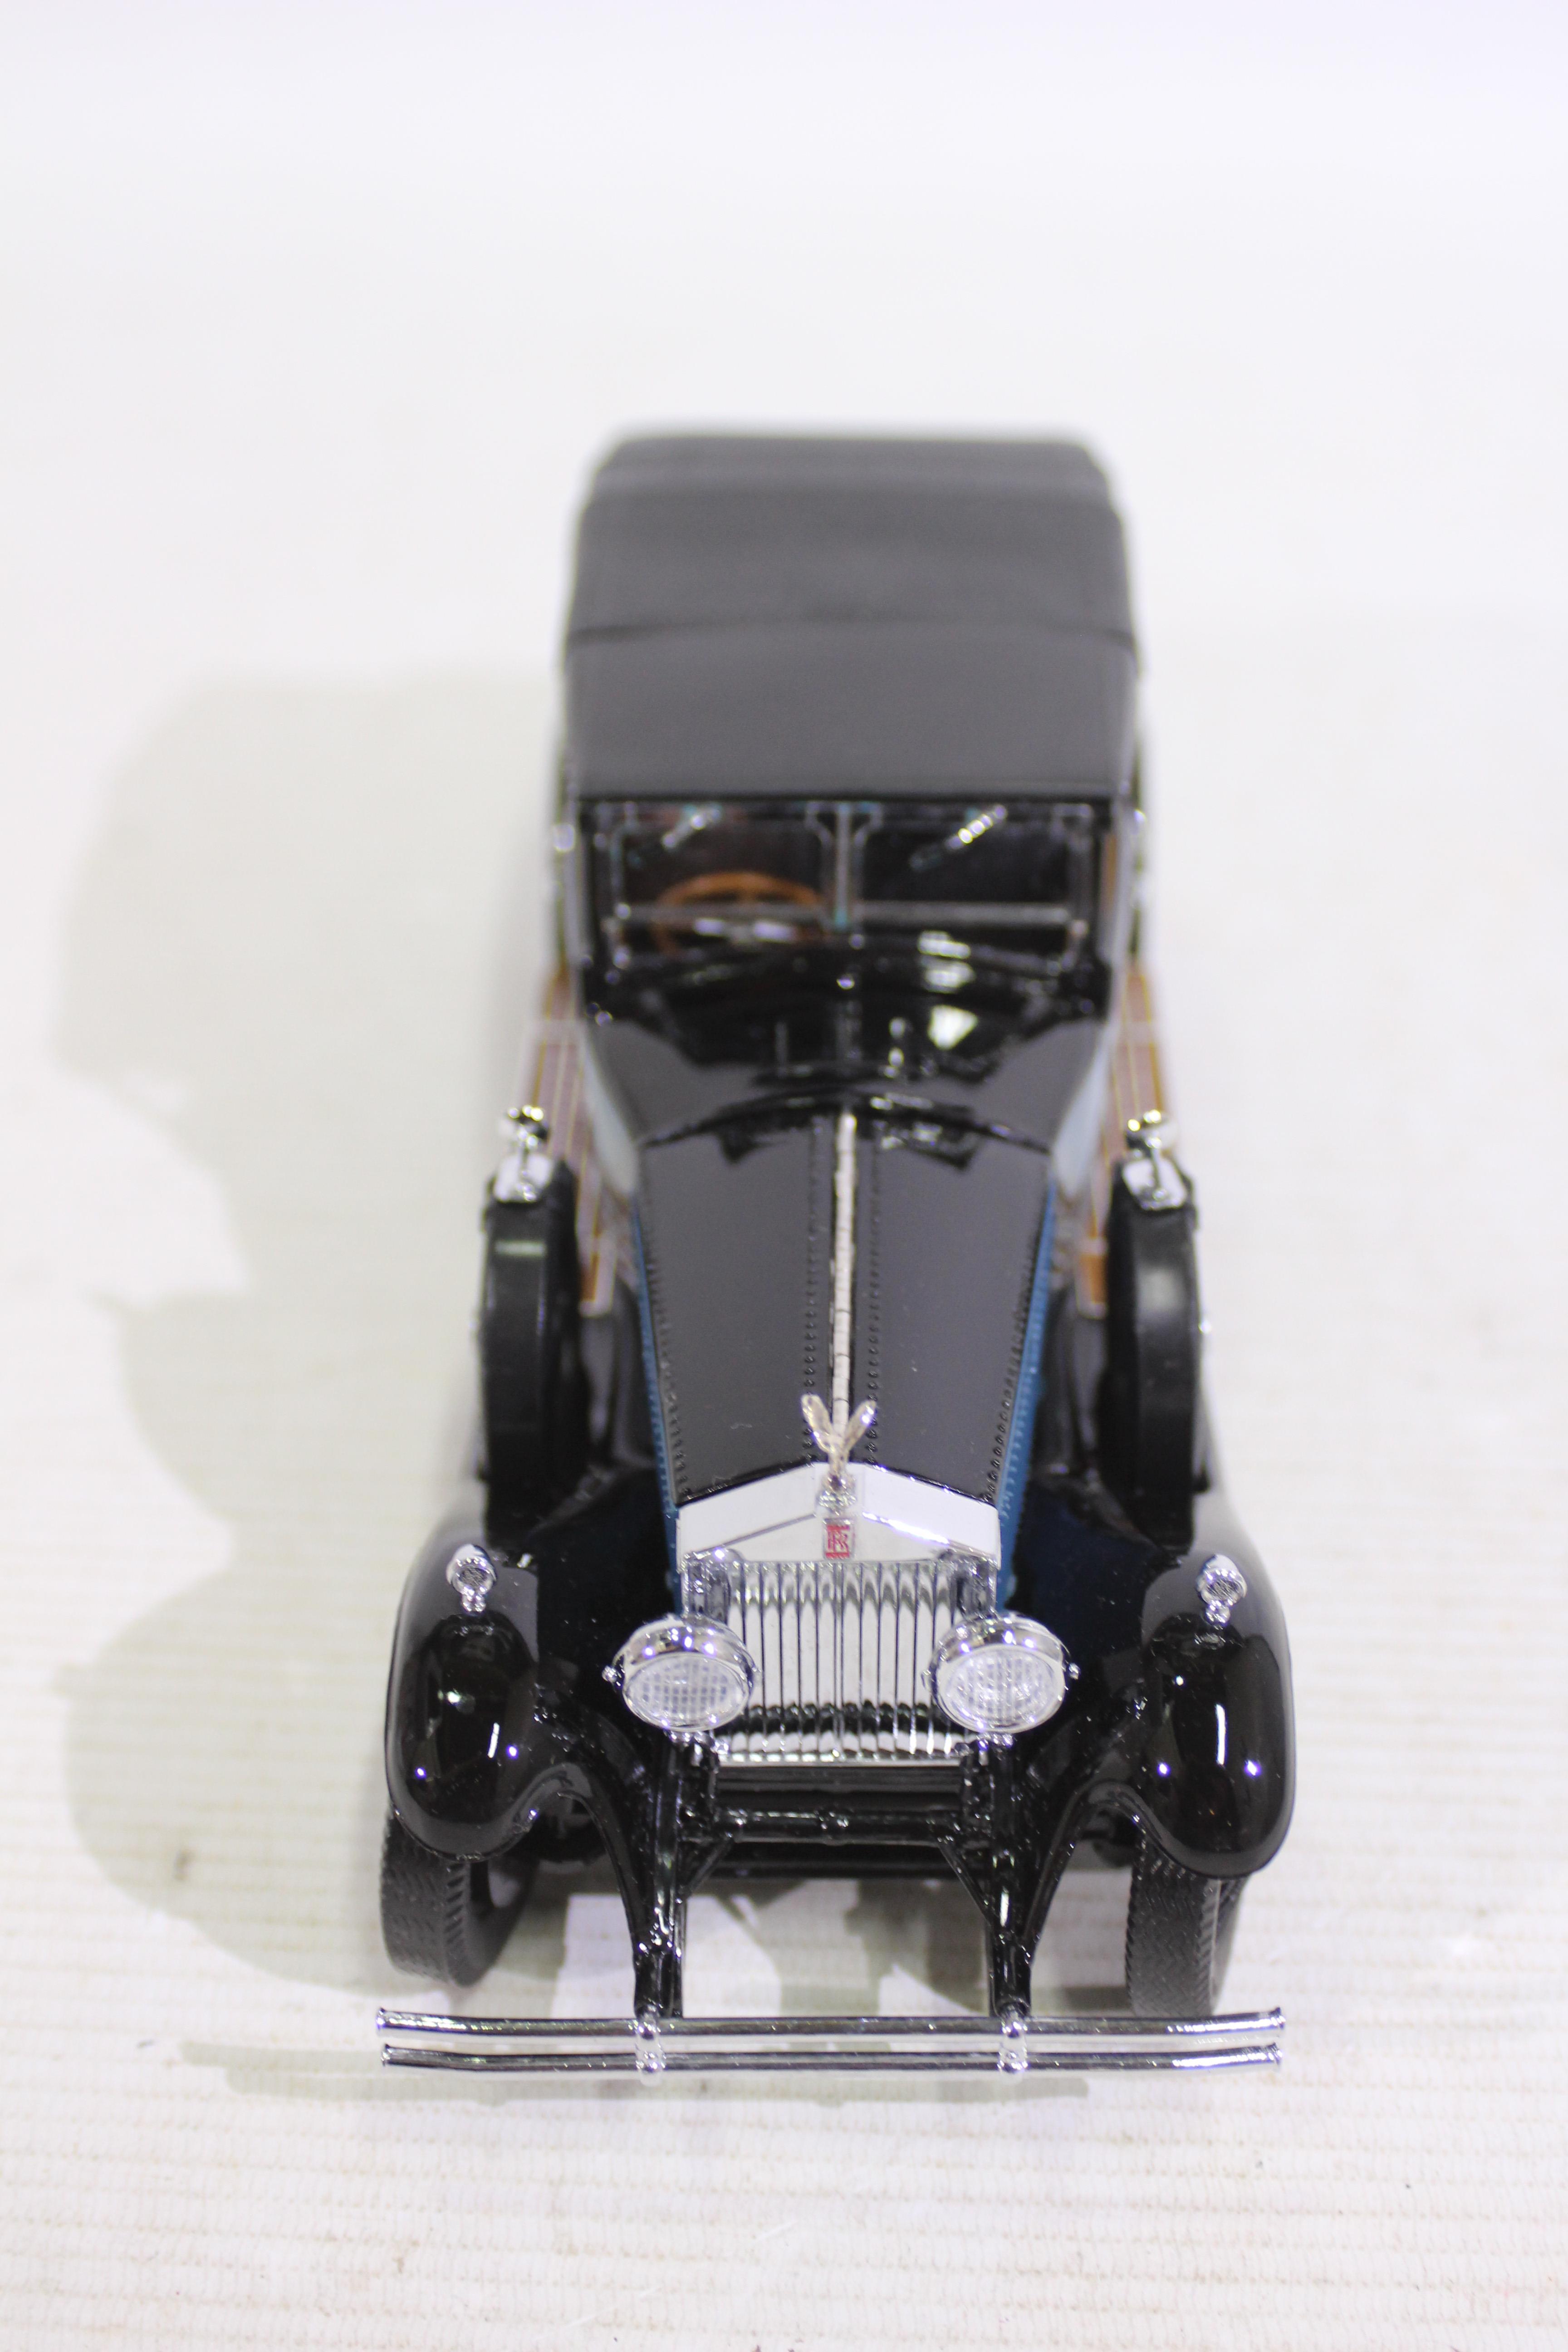 Franklin Mint - A boxed 1929 Rolls Royce Phantom I Cabriolet De Ville in 1:24 scale. - Image 5 of 6